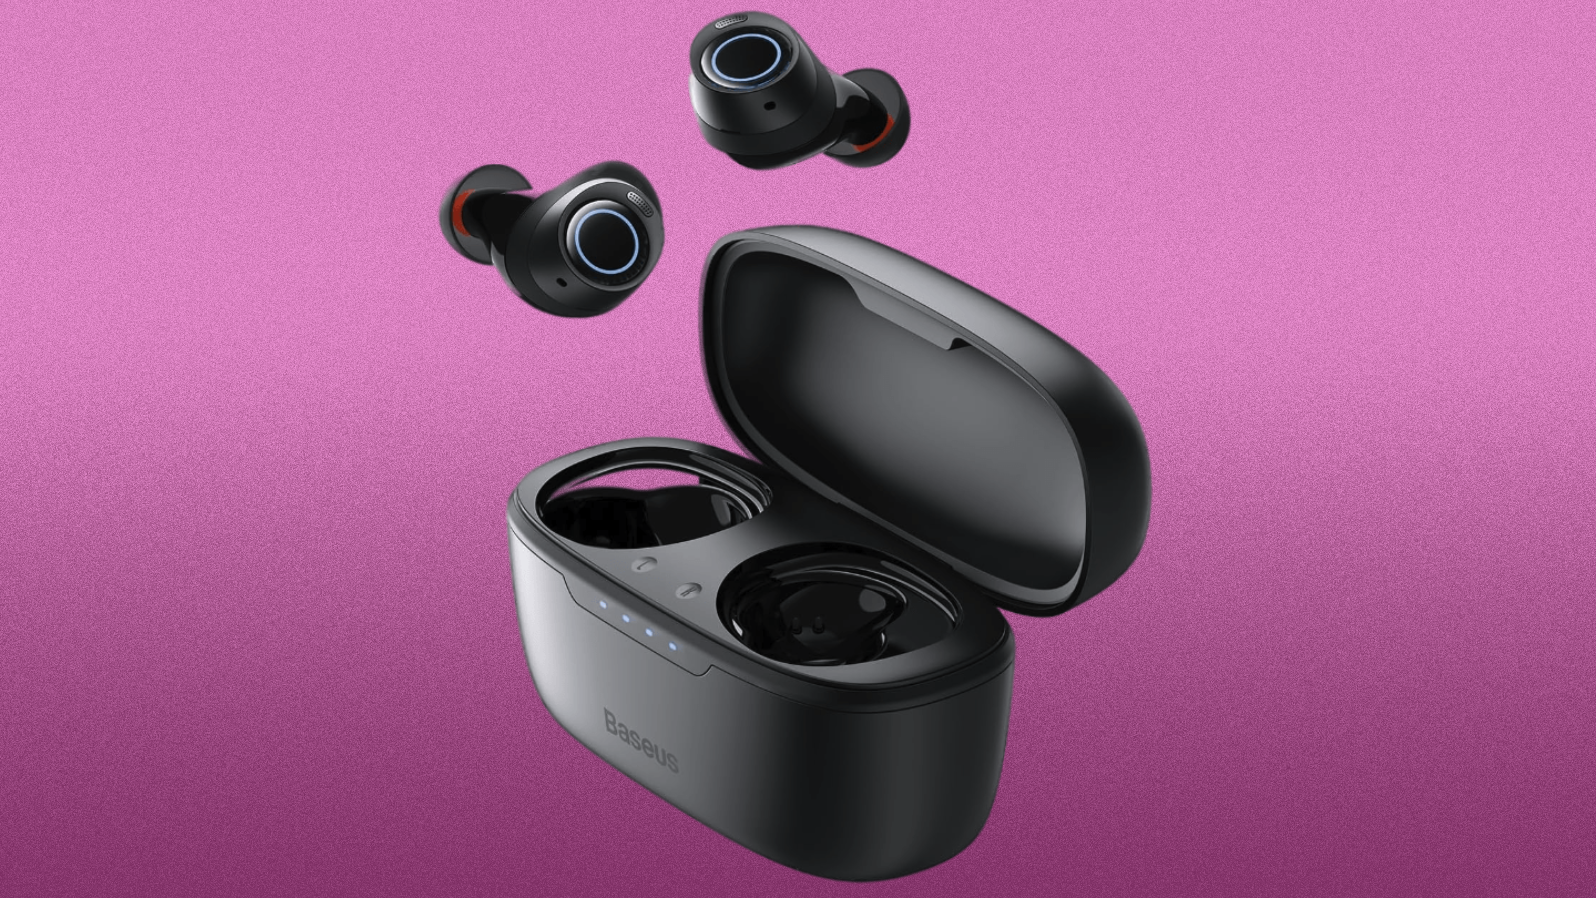 s New Echo Buds Have 2 Key Features That Other Cheap Earbuds Lack -  CNET